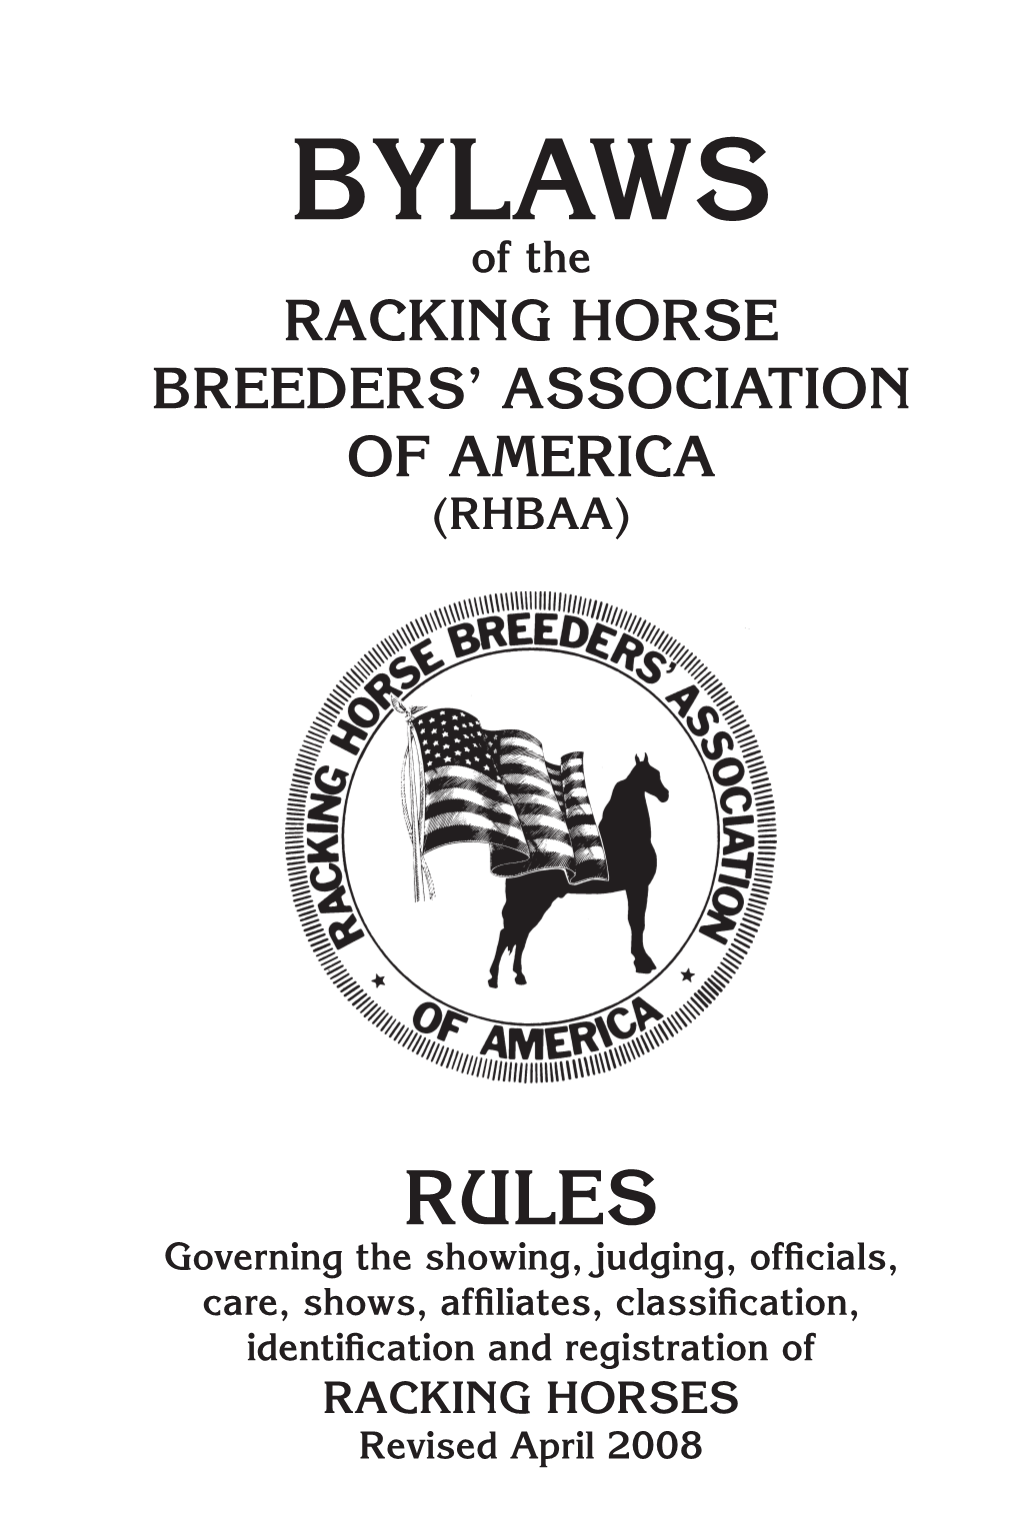 BYLAWS of the RACKING HORSE BREEDERS’ ASSOCIATION of AMERICA (RHBAA)